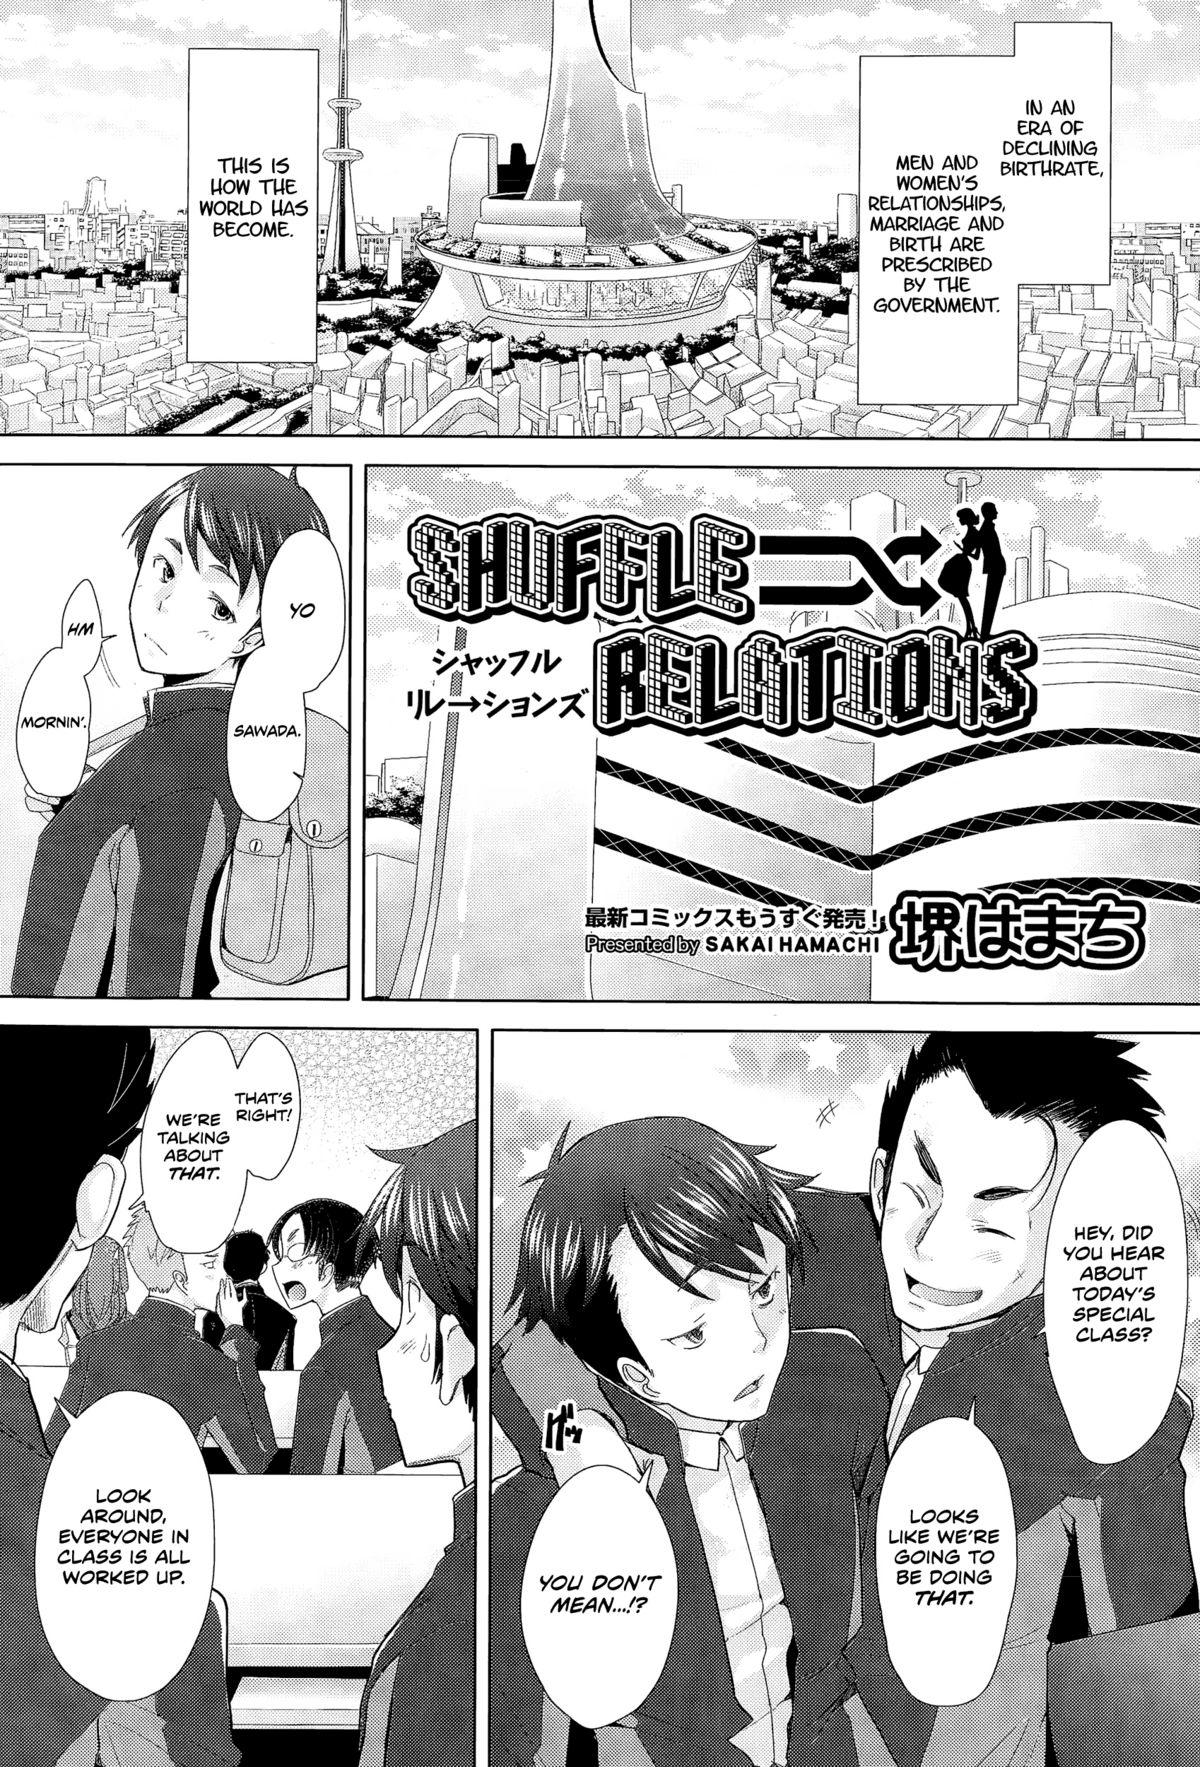 Squirters Shuffle Relations Kiss - Page 1